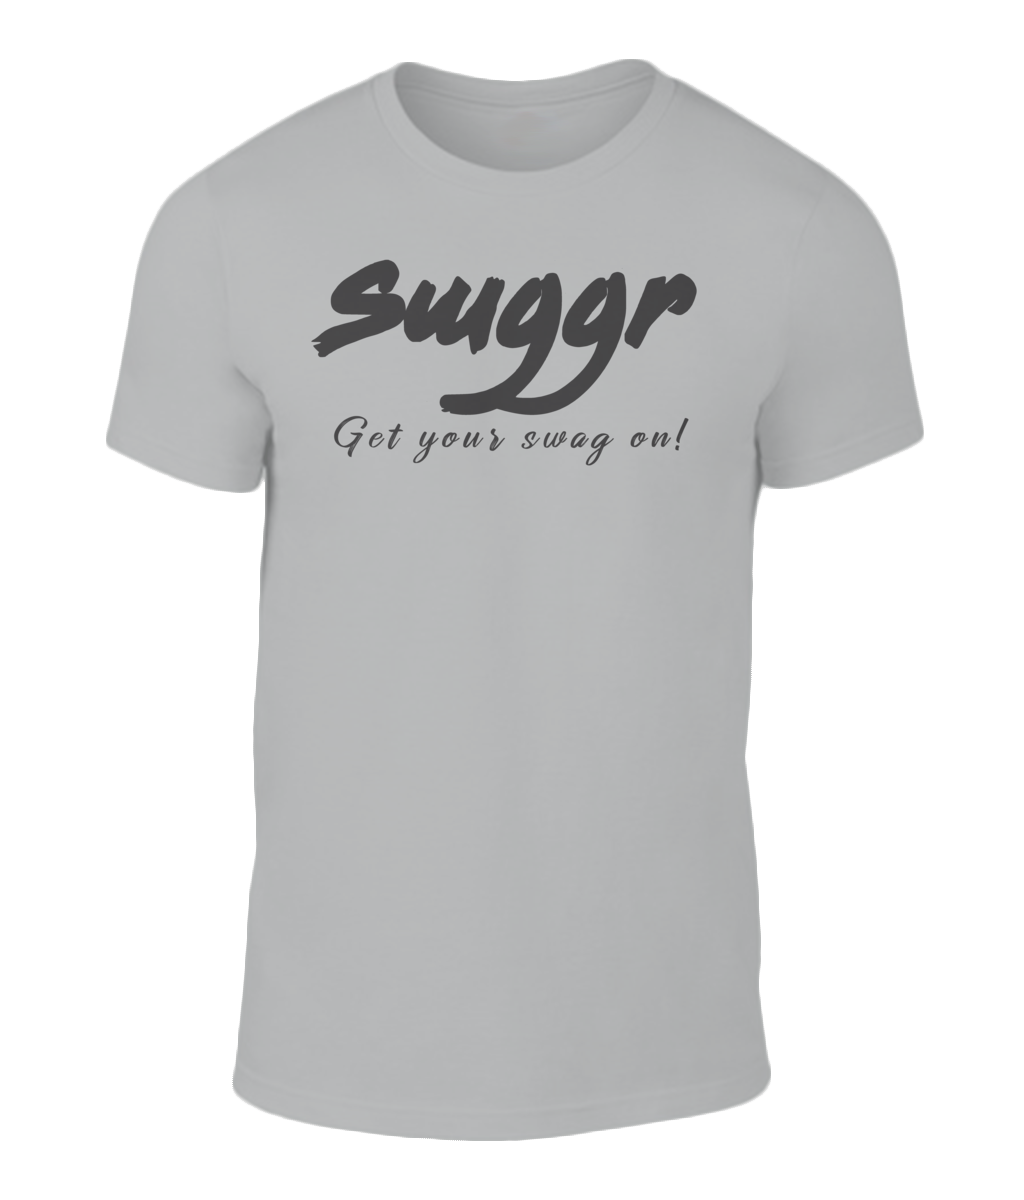 Swggr – Get your swag on! – Swggr